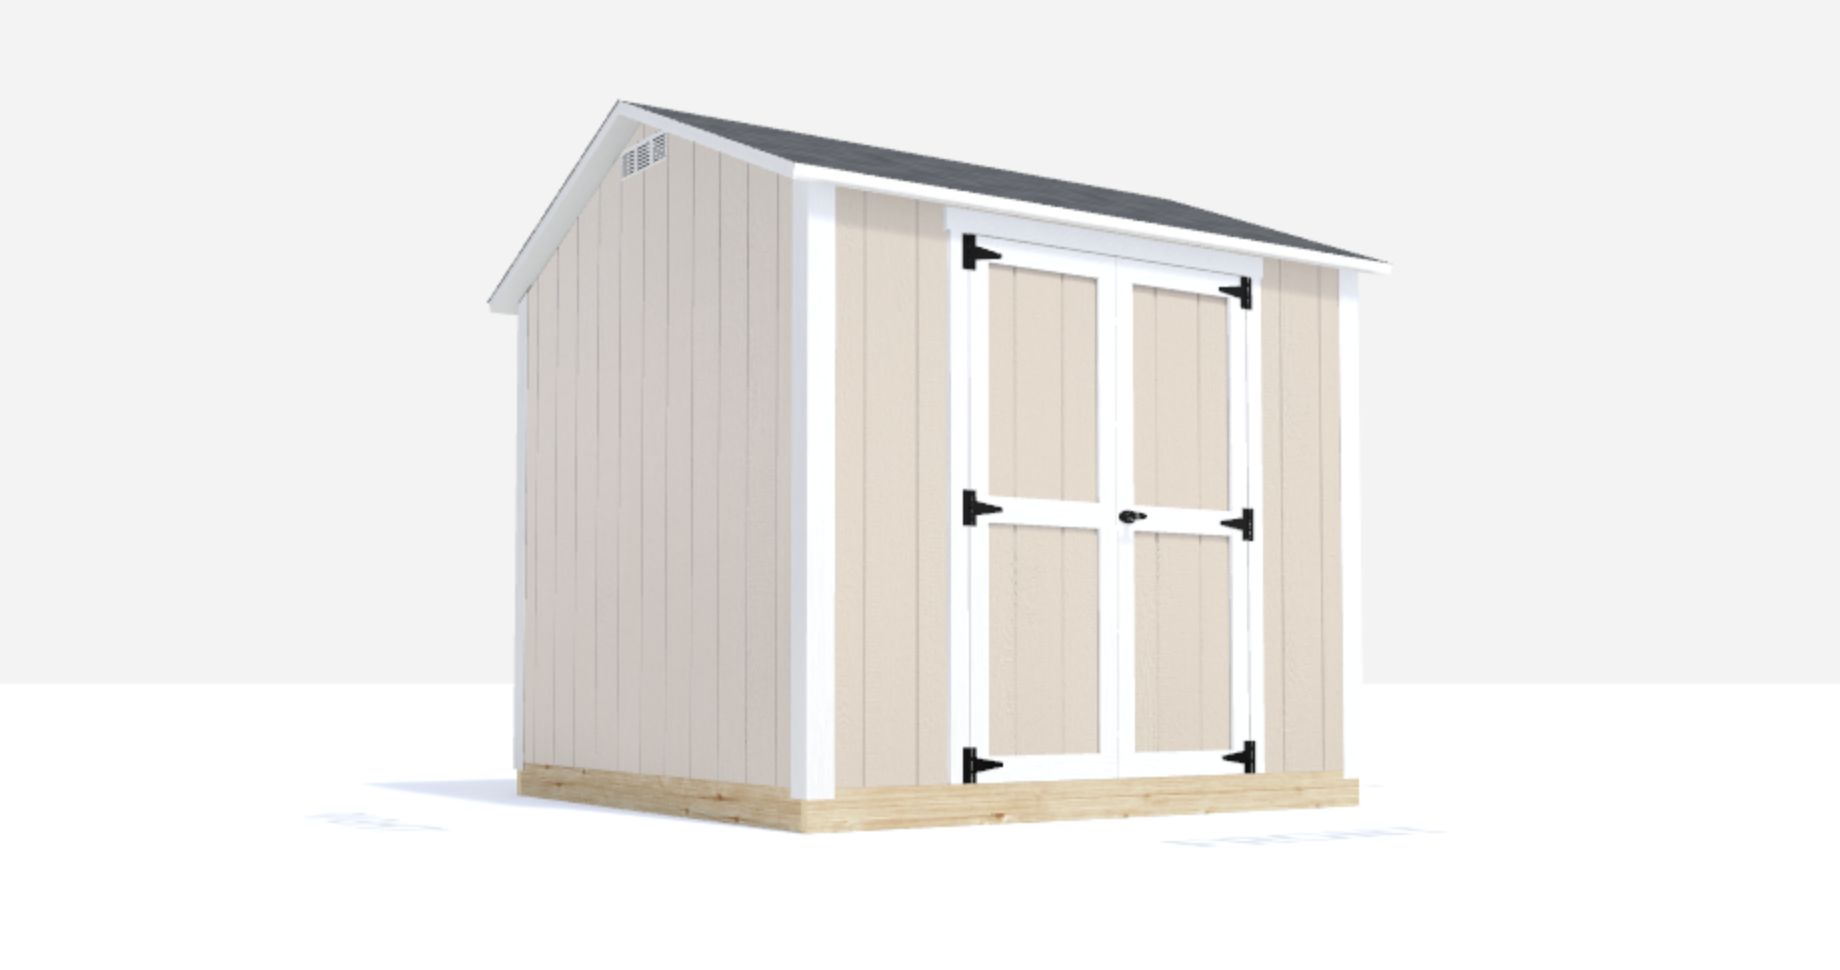 8x8 gable shed